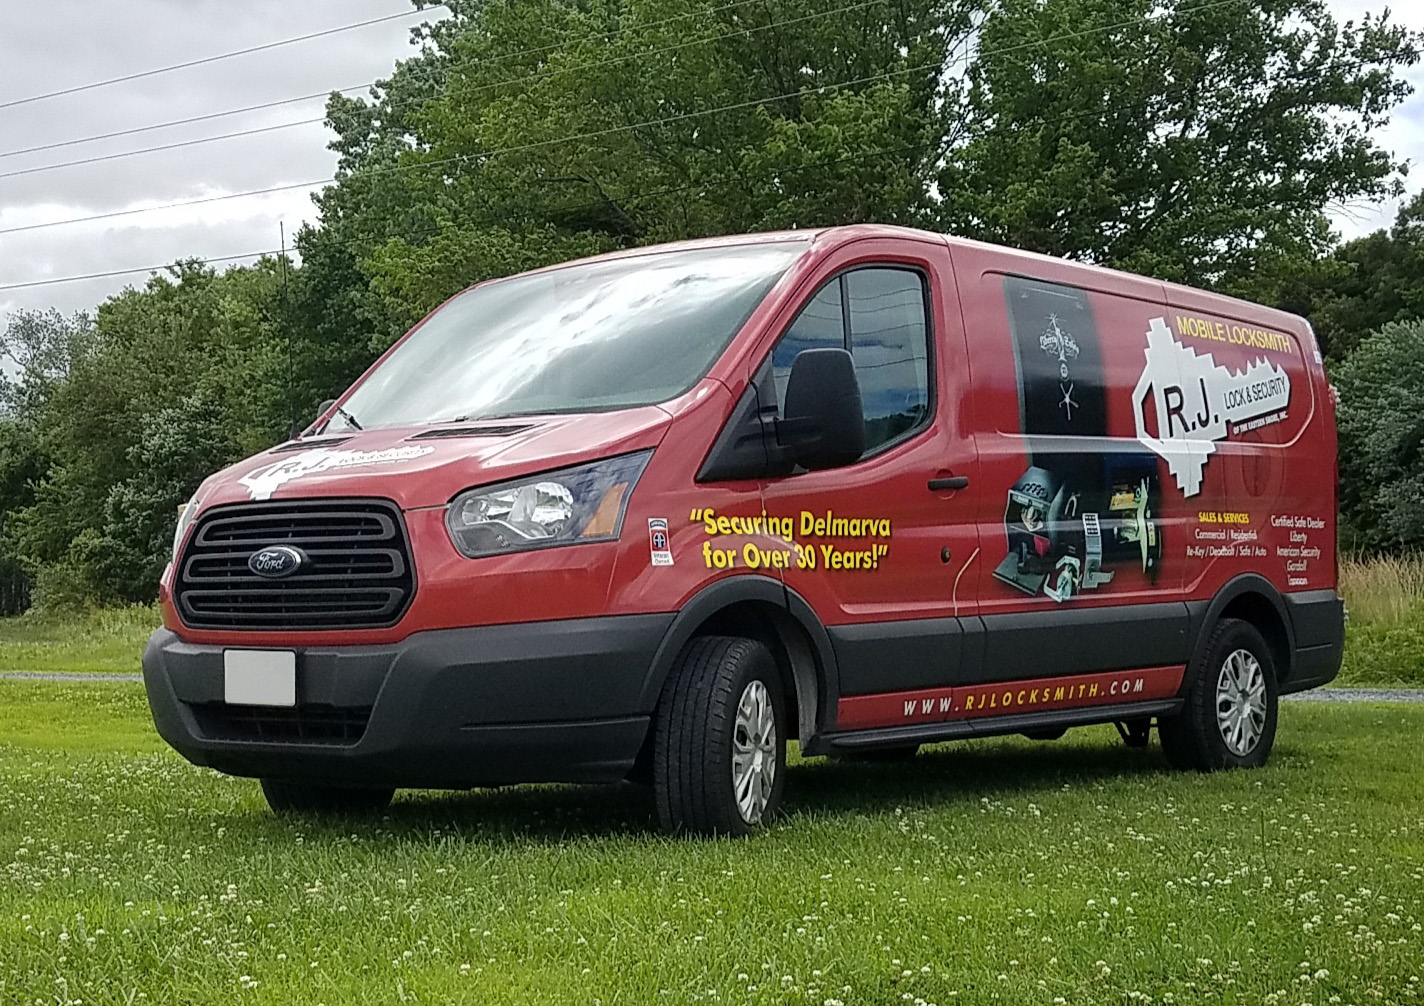 RJ Lock New red work van with logo on the side